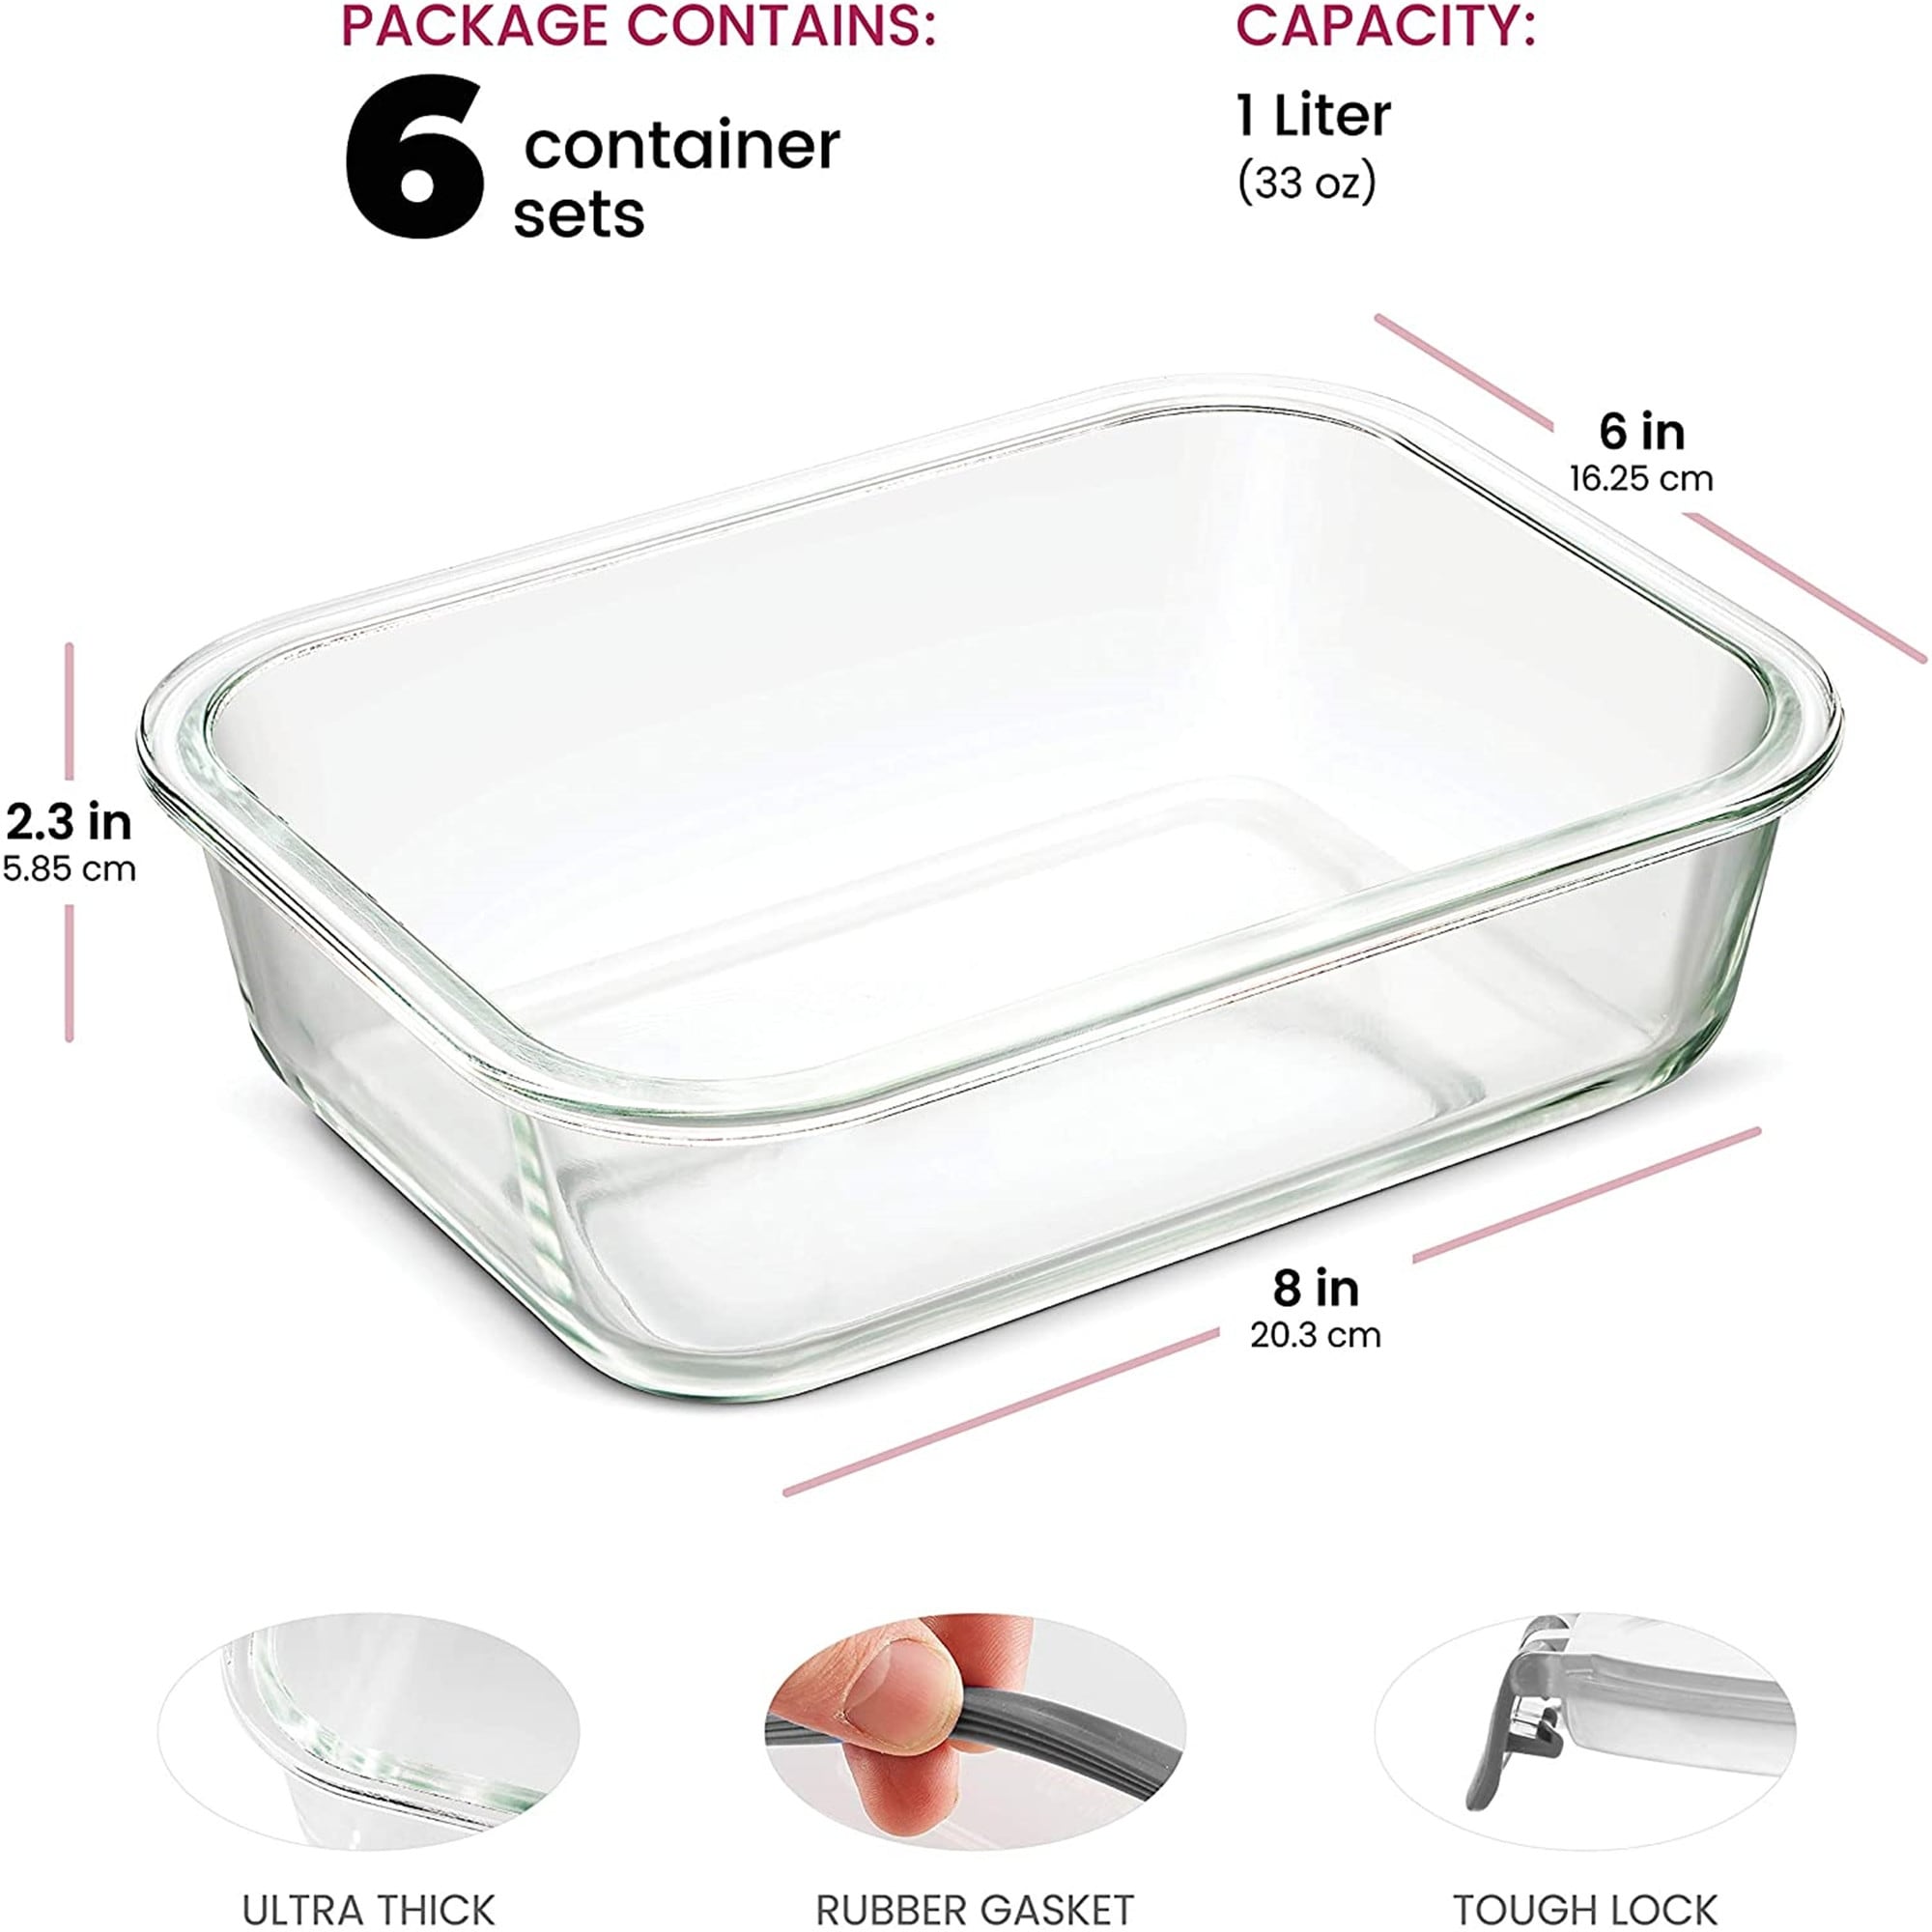 https://ak1.ostkcdn.com/images/products/is/images/direct/6c86035f5461a0c0455783e8cc44346e5741f729/Superior-Glass-Meal-Prep-Containers---6-pack-%2835oz%29-Newly-Innovated-Hinged-BPA-free-Locking-lids---100%25-Leak-Proof-Glass.jpg